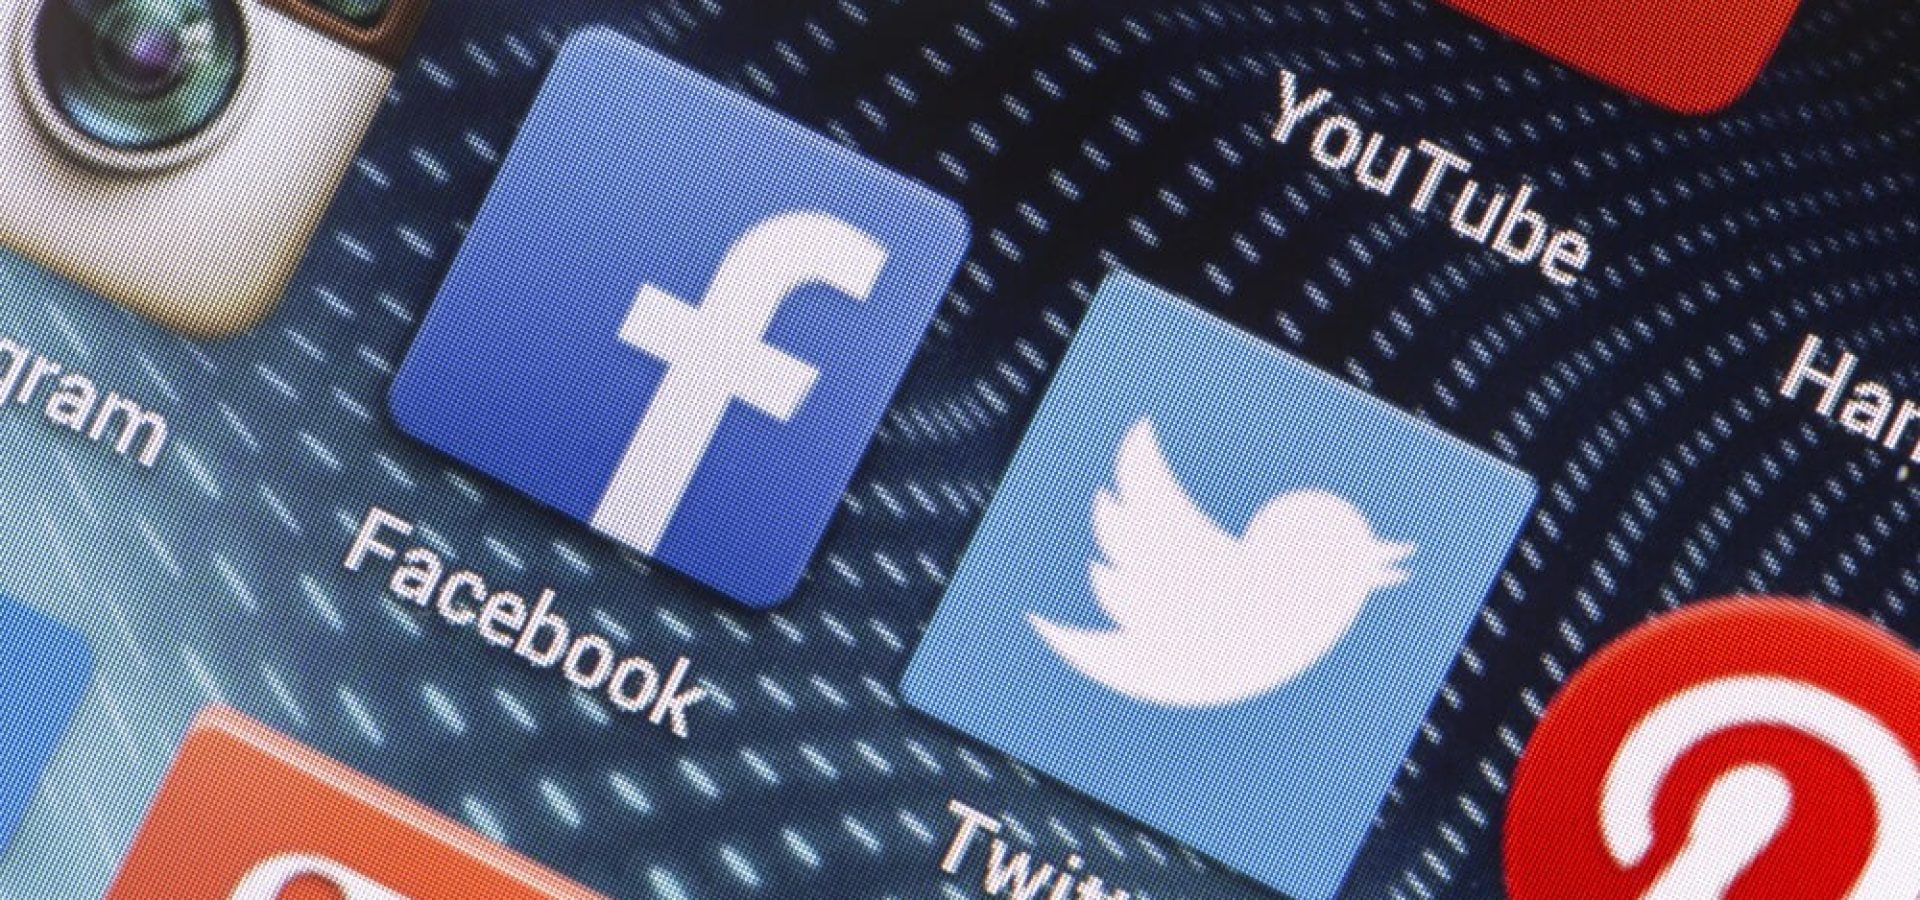 Twitter: Facebook, Twitter and other on smart phone screen close up.